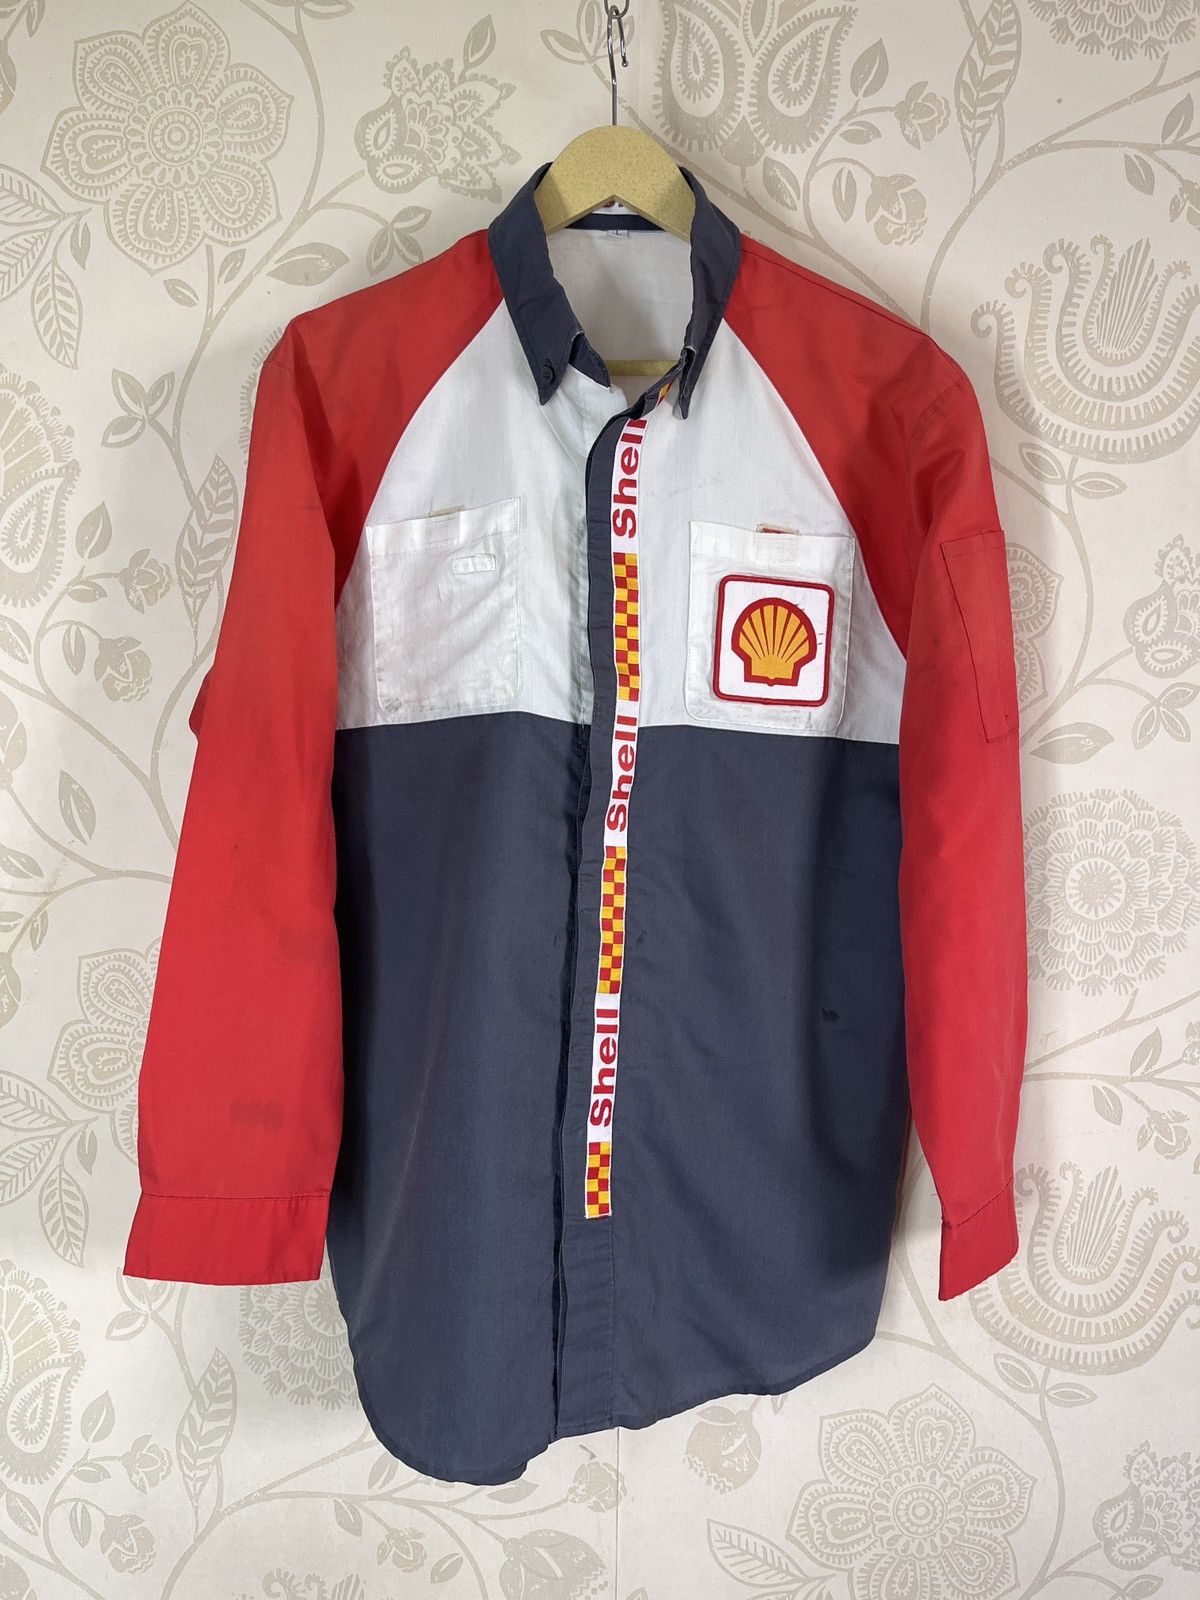 Shell Uniform Workers Vintage Japanese Outlet 1990s - 17